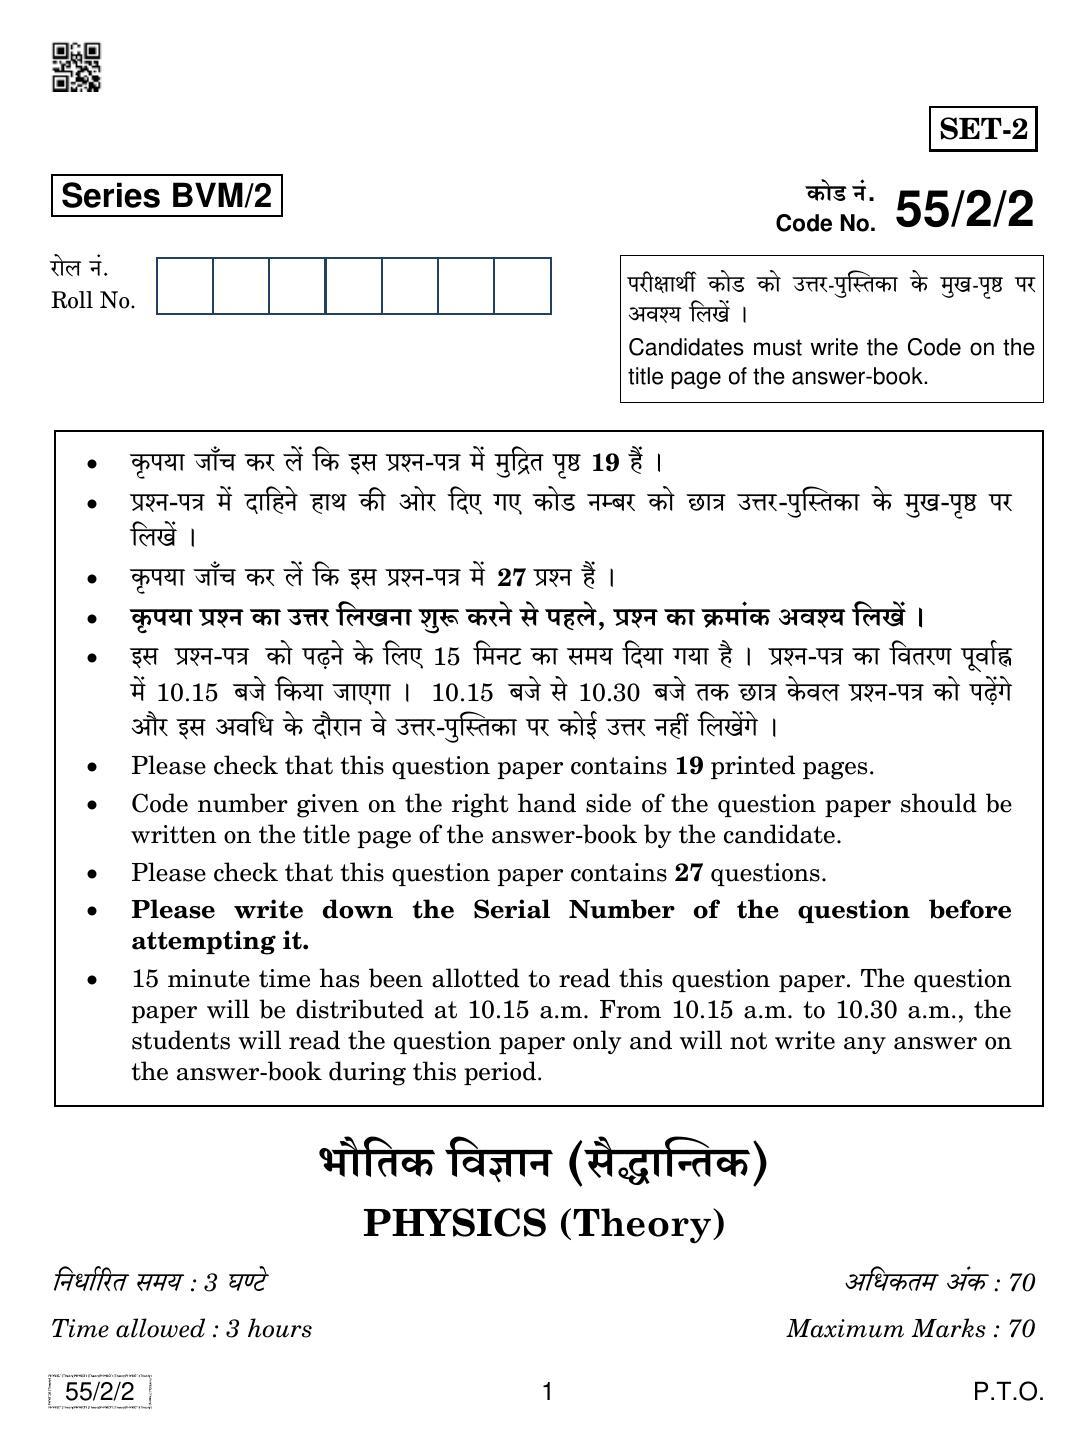 CBSE Class 12 55-2-2 Physics 2019 Question Paper - Page 1